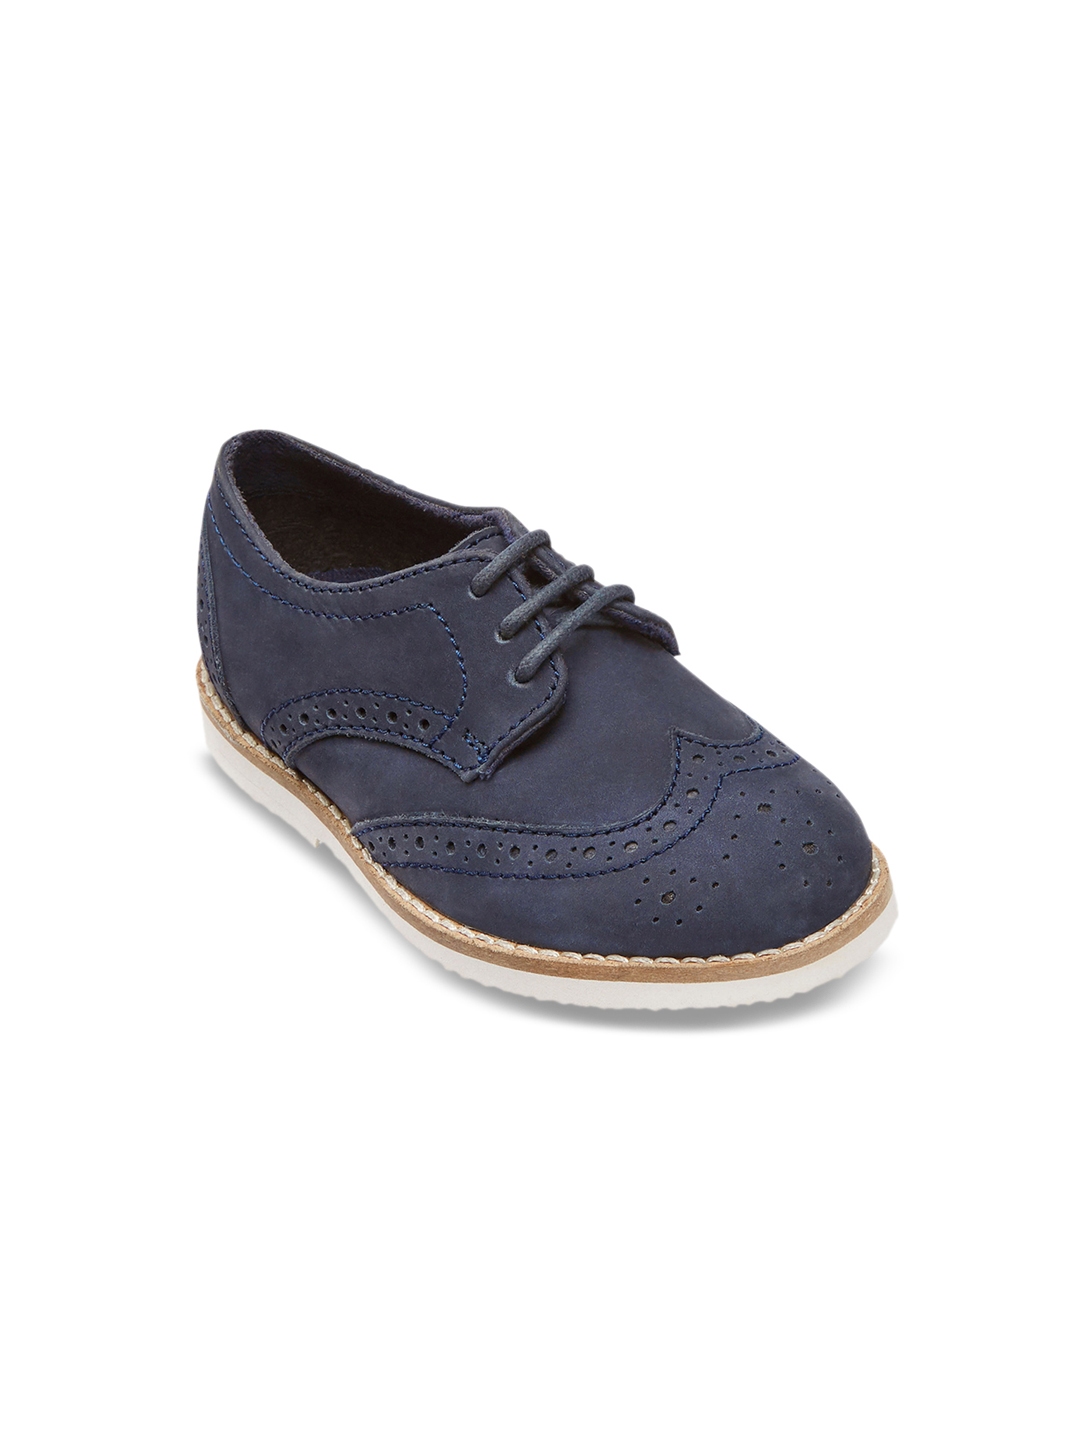 Buy Next Boys Navy Blue Leather Brogues - Casual Shoes for Boys 2398555 ...